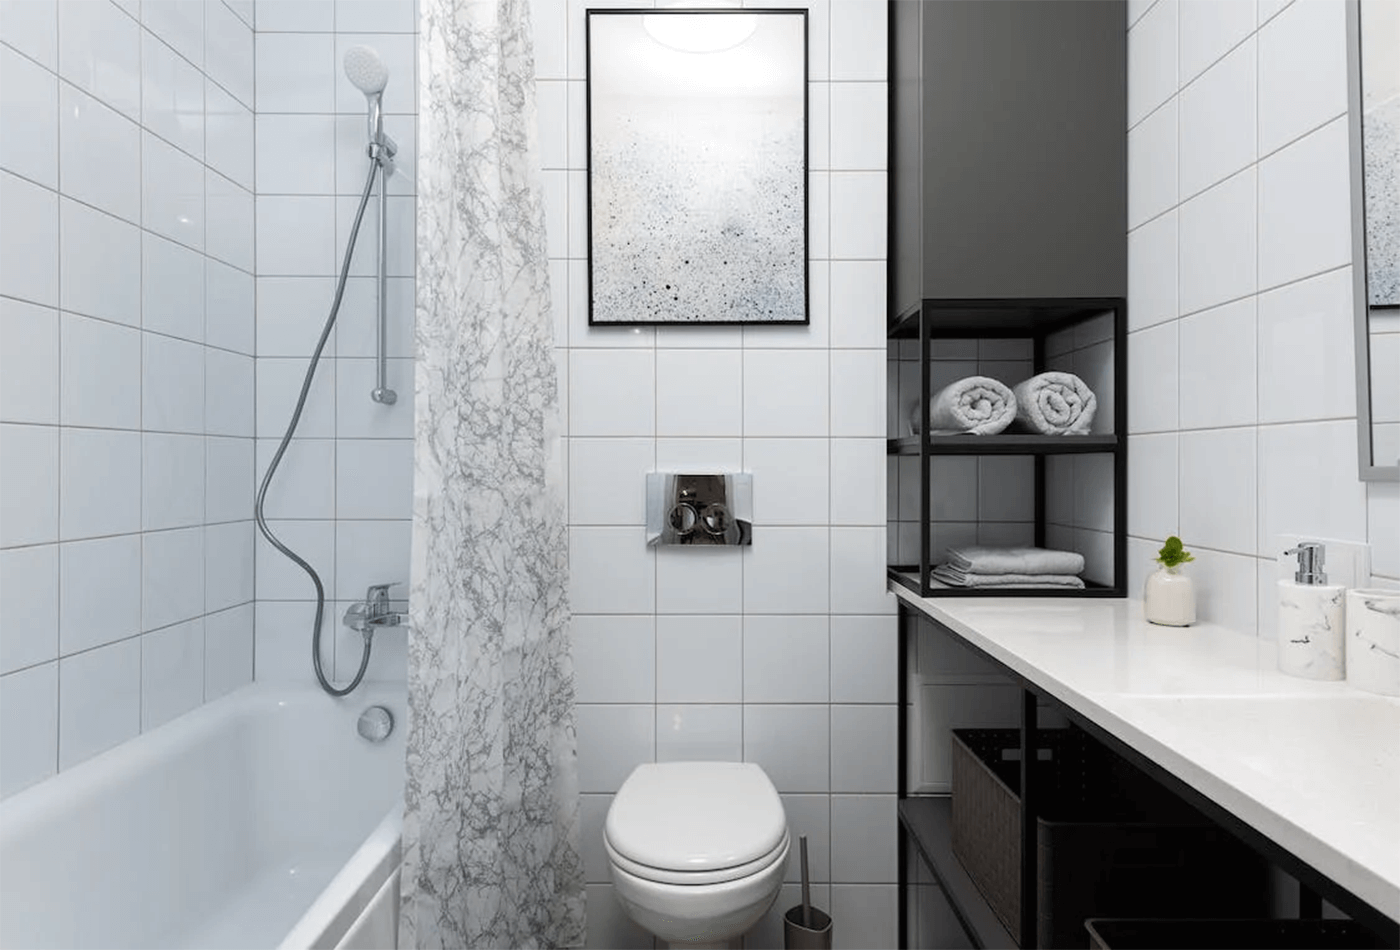 Can We Use White Quartz for Shower Walls